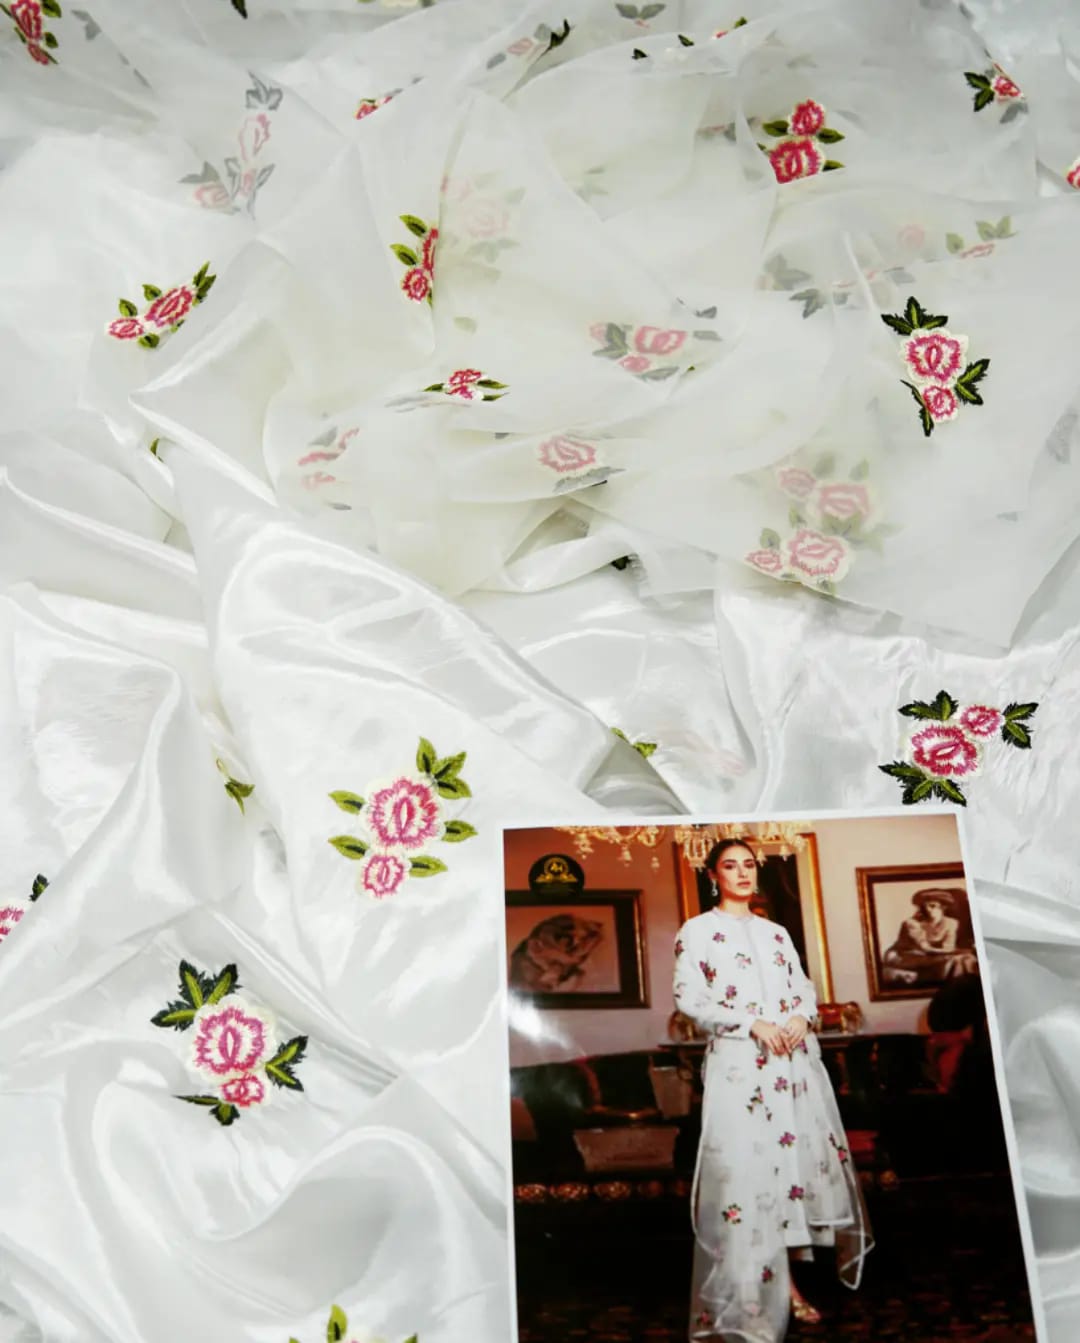 LS28-WHITE SHINNING COTOTN SILK EMBROIDERED